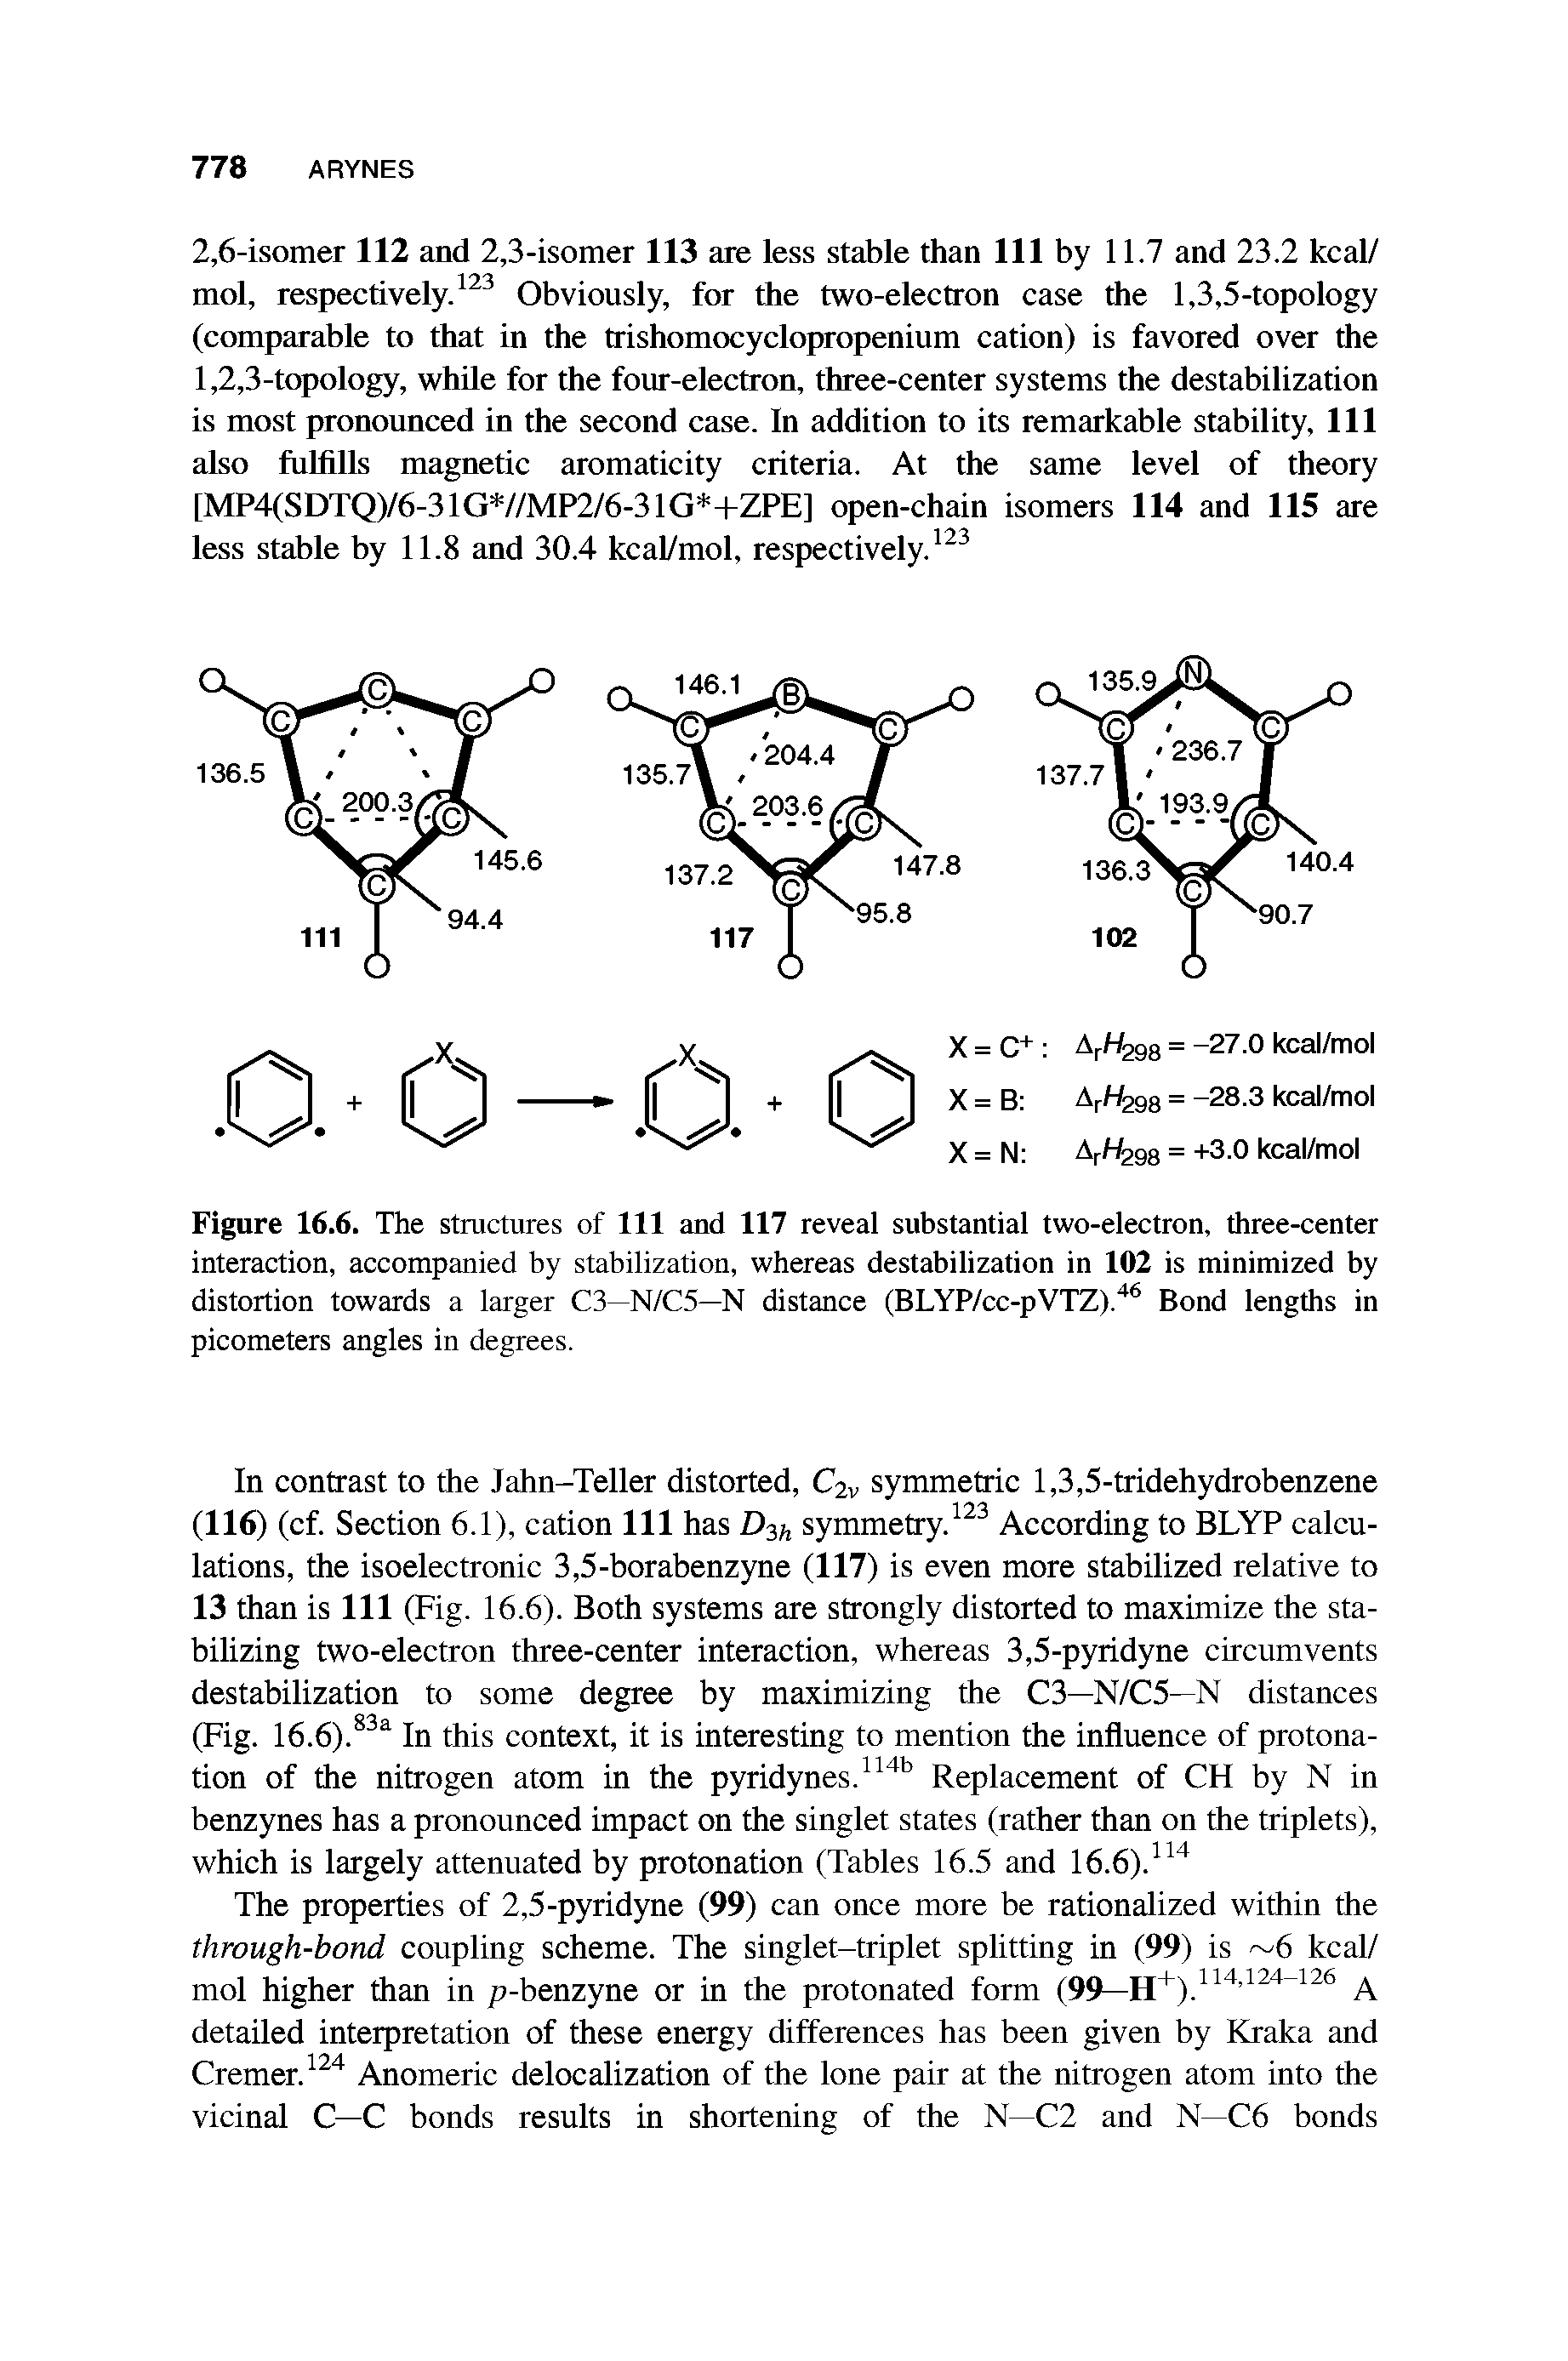 Figure 16.6. The structures of 111 and 117 reveal substantial two-electron, three-center interaction, accompanied by stabilization, whereas destabilization in 102 is minimized by distortion towards a larger C3—N/C5—N distance (BLYP/cc-pVTZ). Bond lengths in picometers angles in degrees.